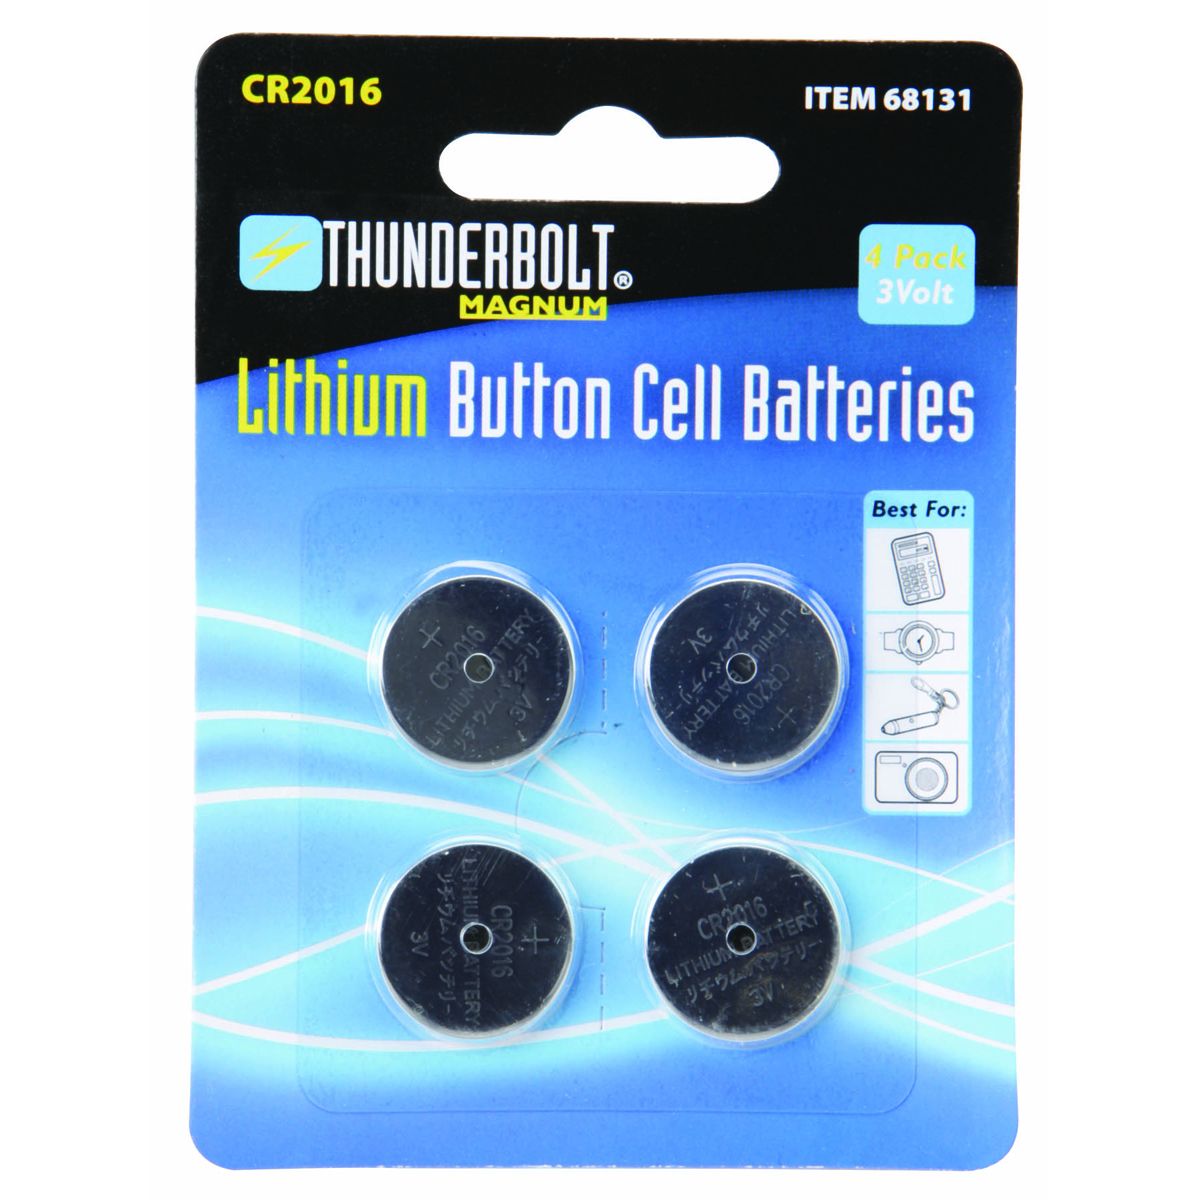 THUNDERBOLT MAGNUM CR2016 Lithium Button Cell Batteries, 4 Pack